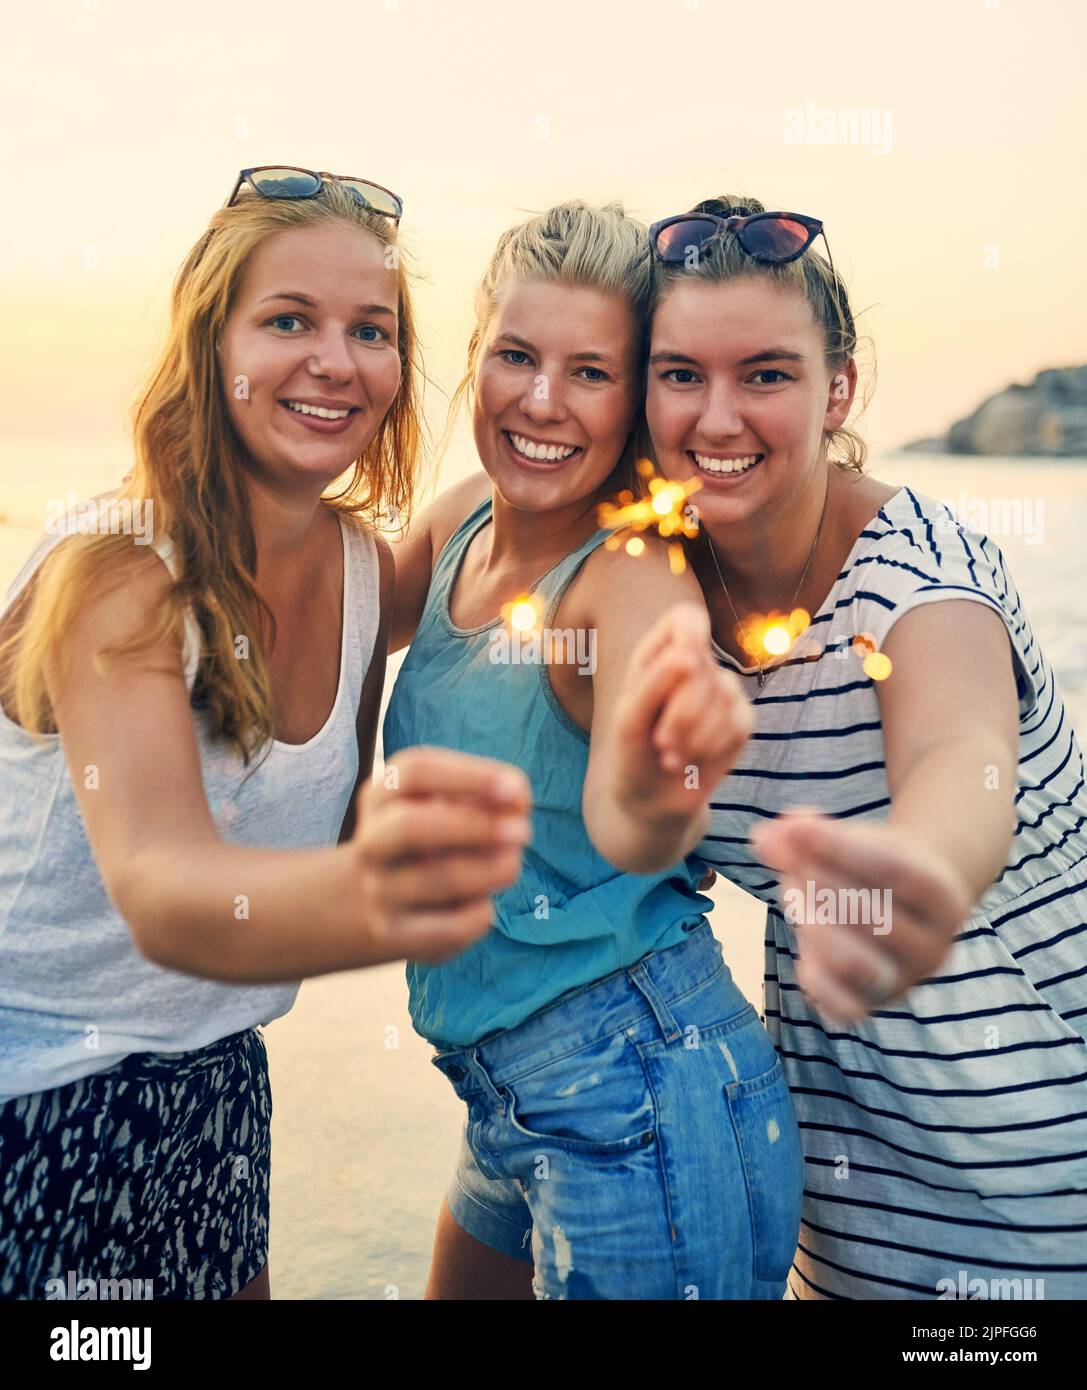 Our friendship will never lose its sparkle. young female best friends hanging out at the beach. Stock Photo